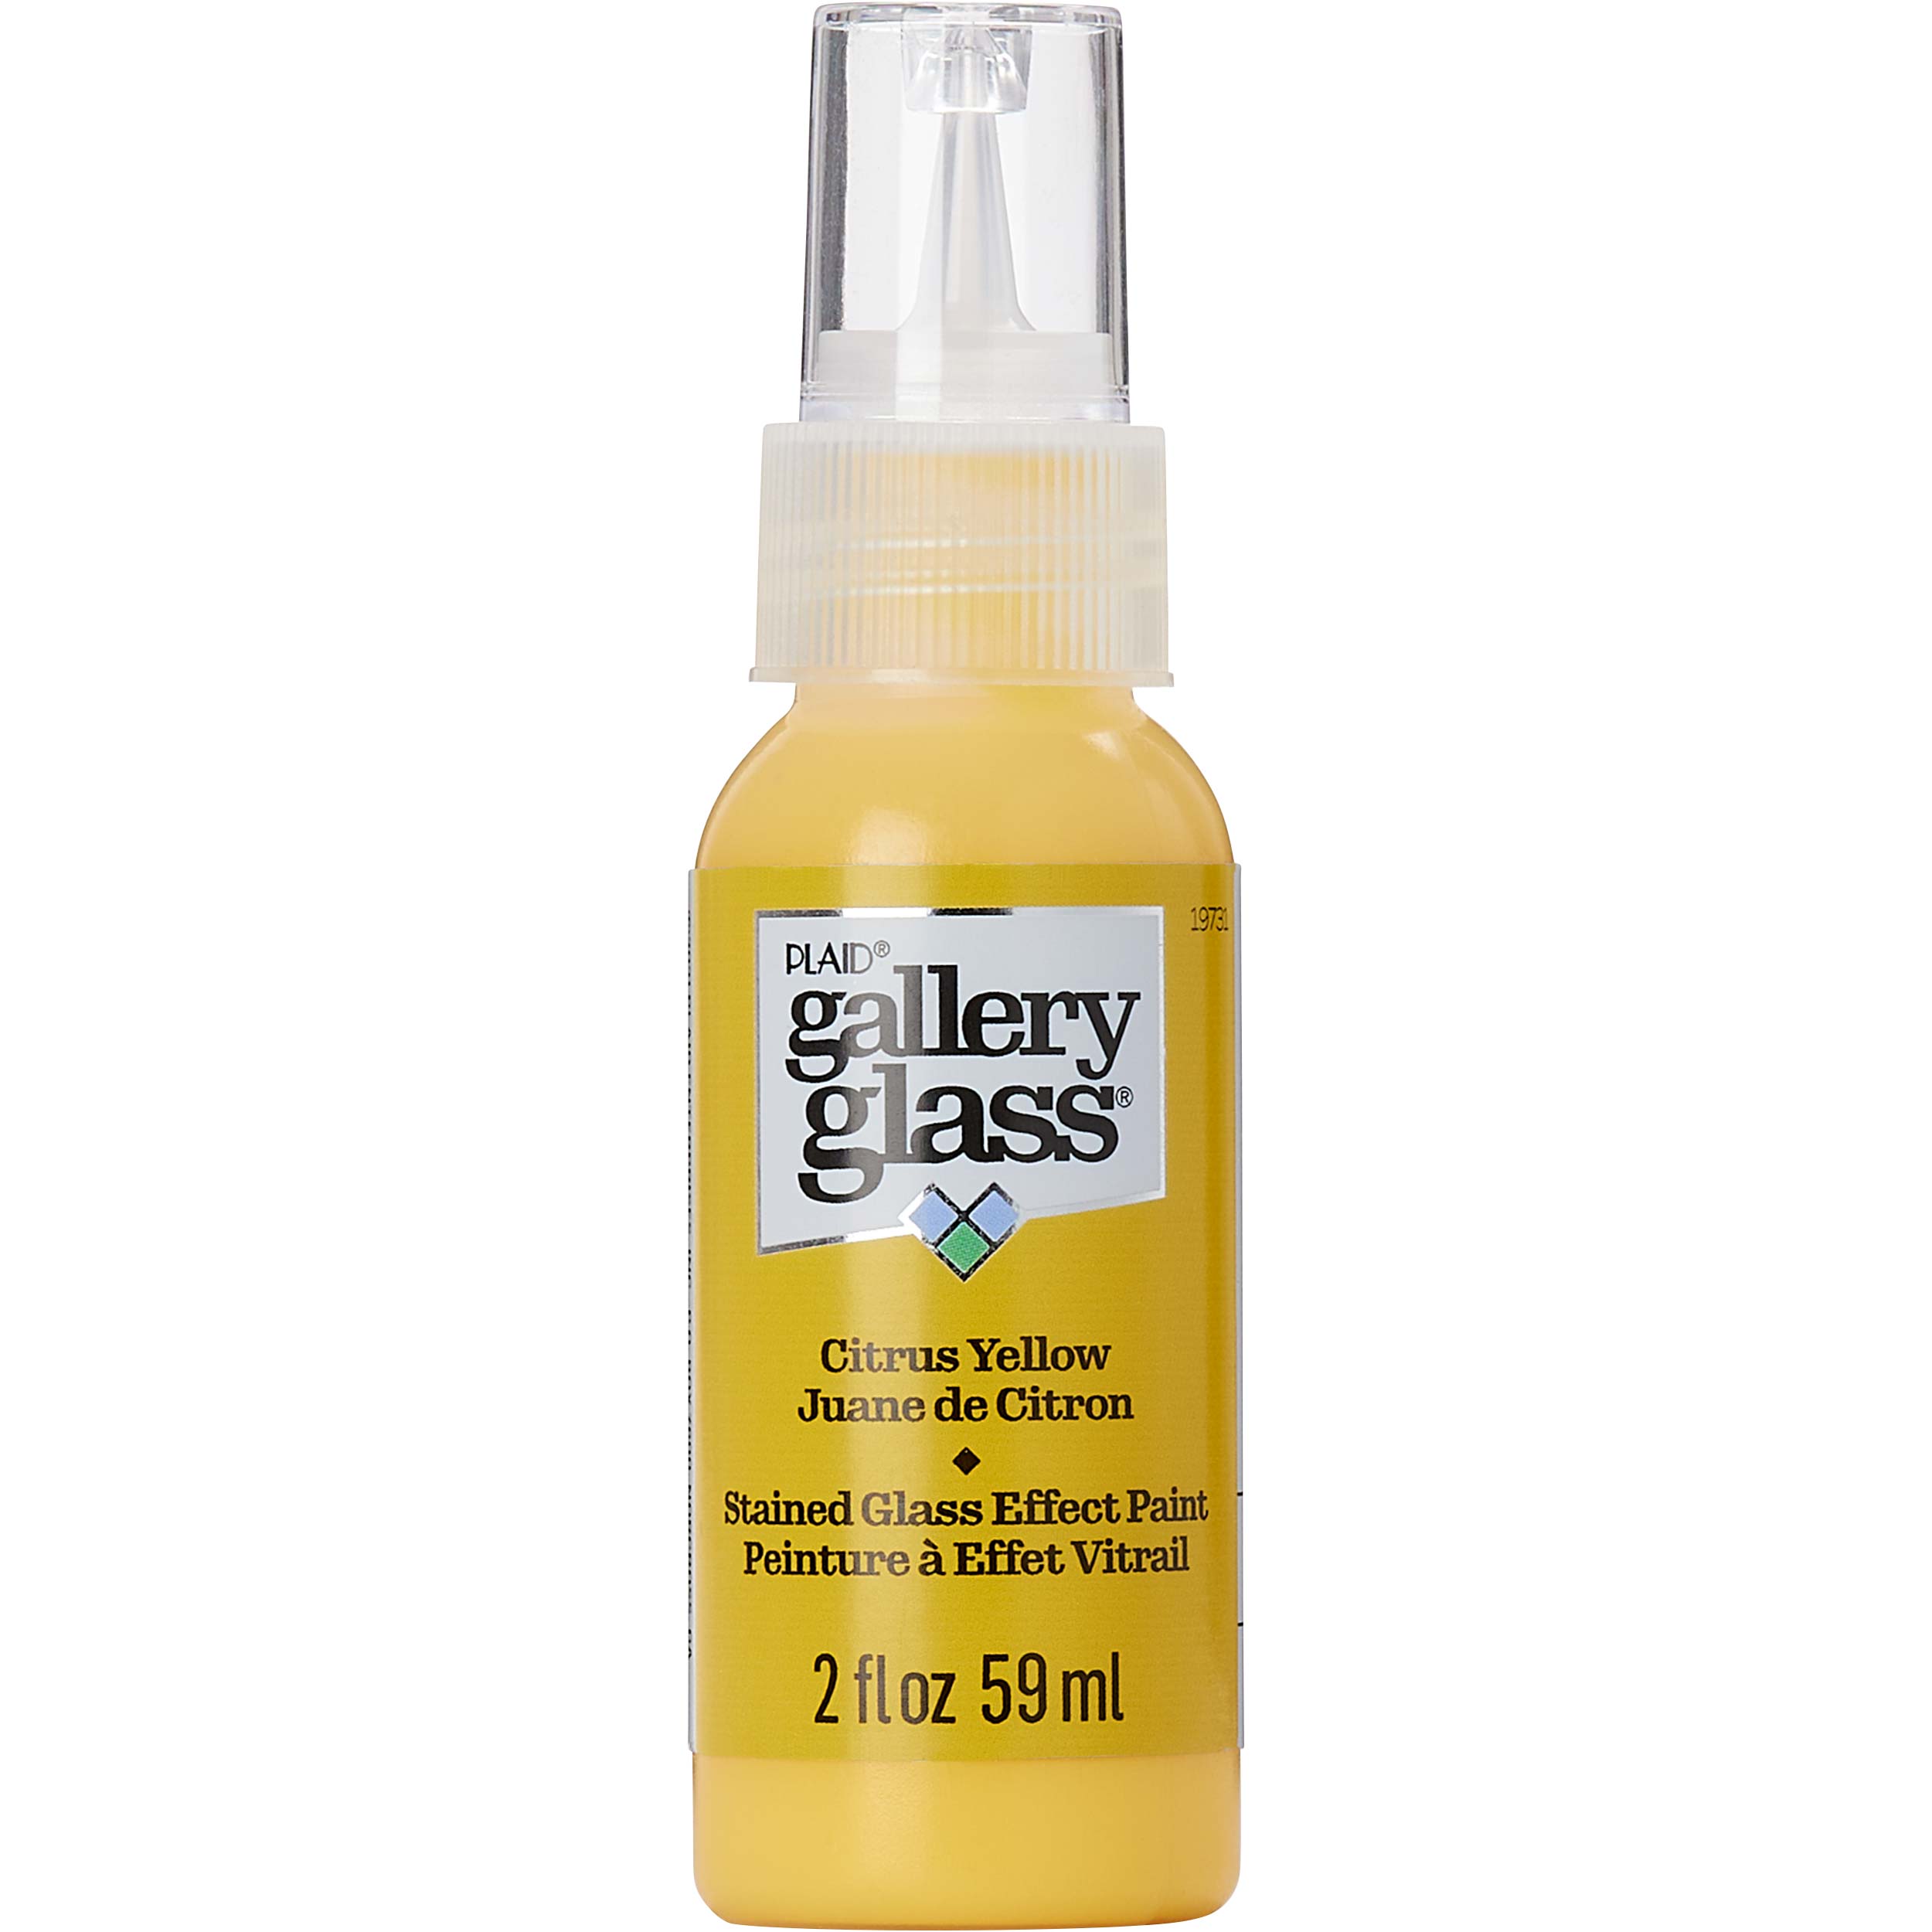 Gallery Glass ® Stained Glass Effect Paint - Citrus Yellow, 2 oz. - 19731